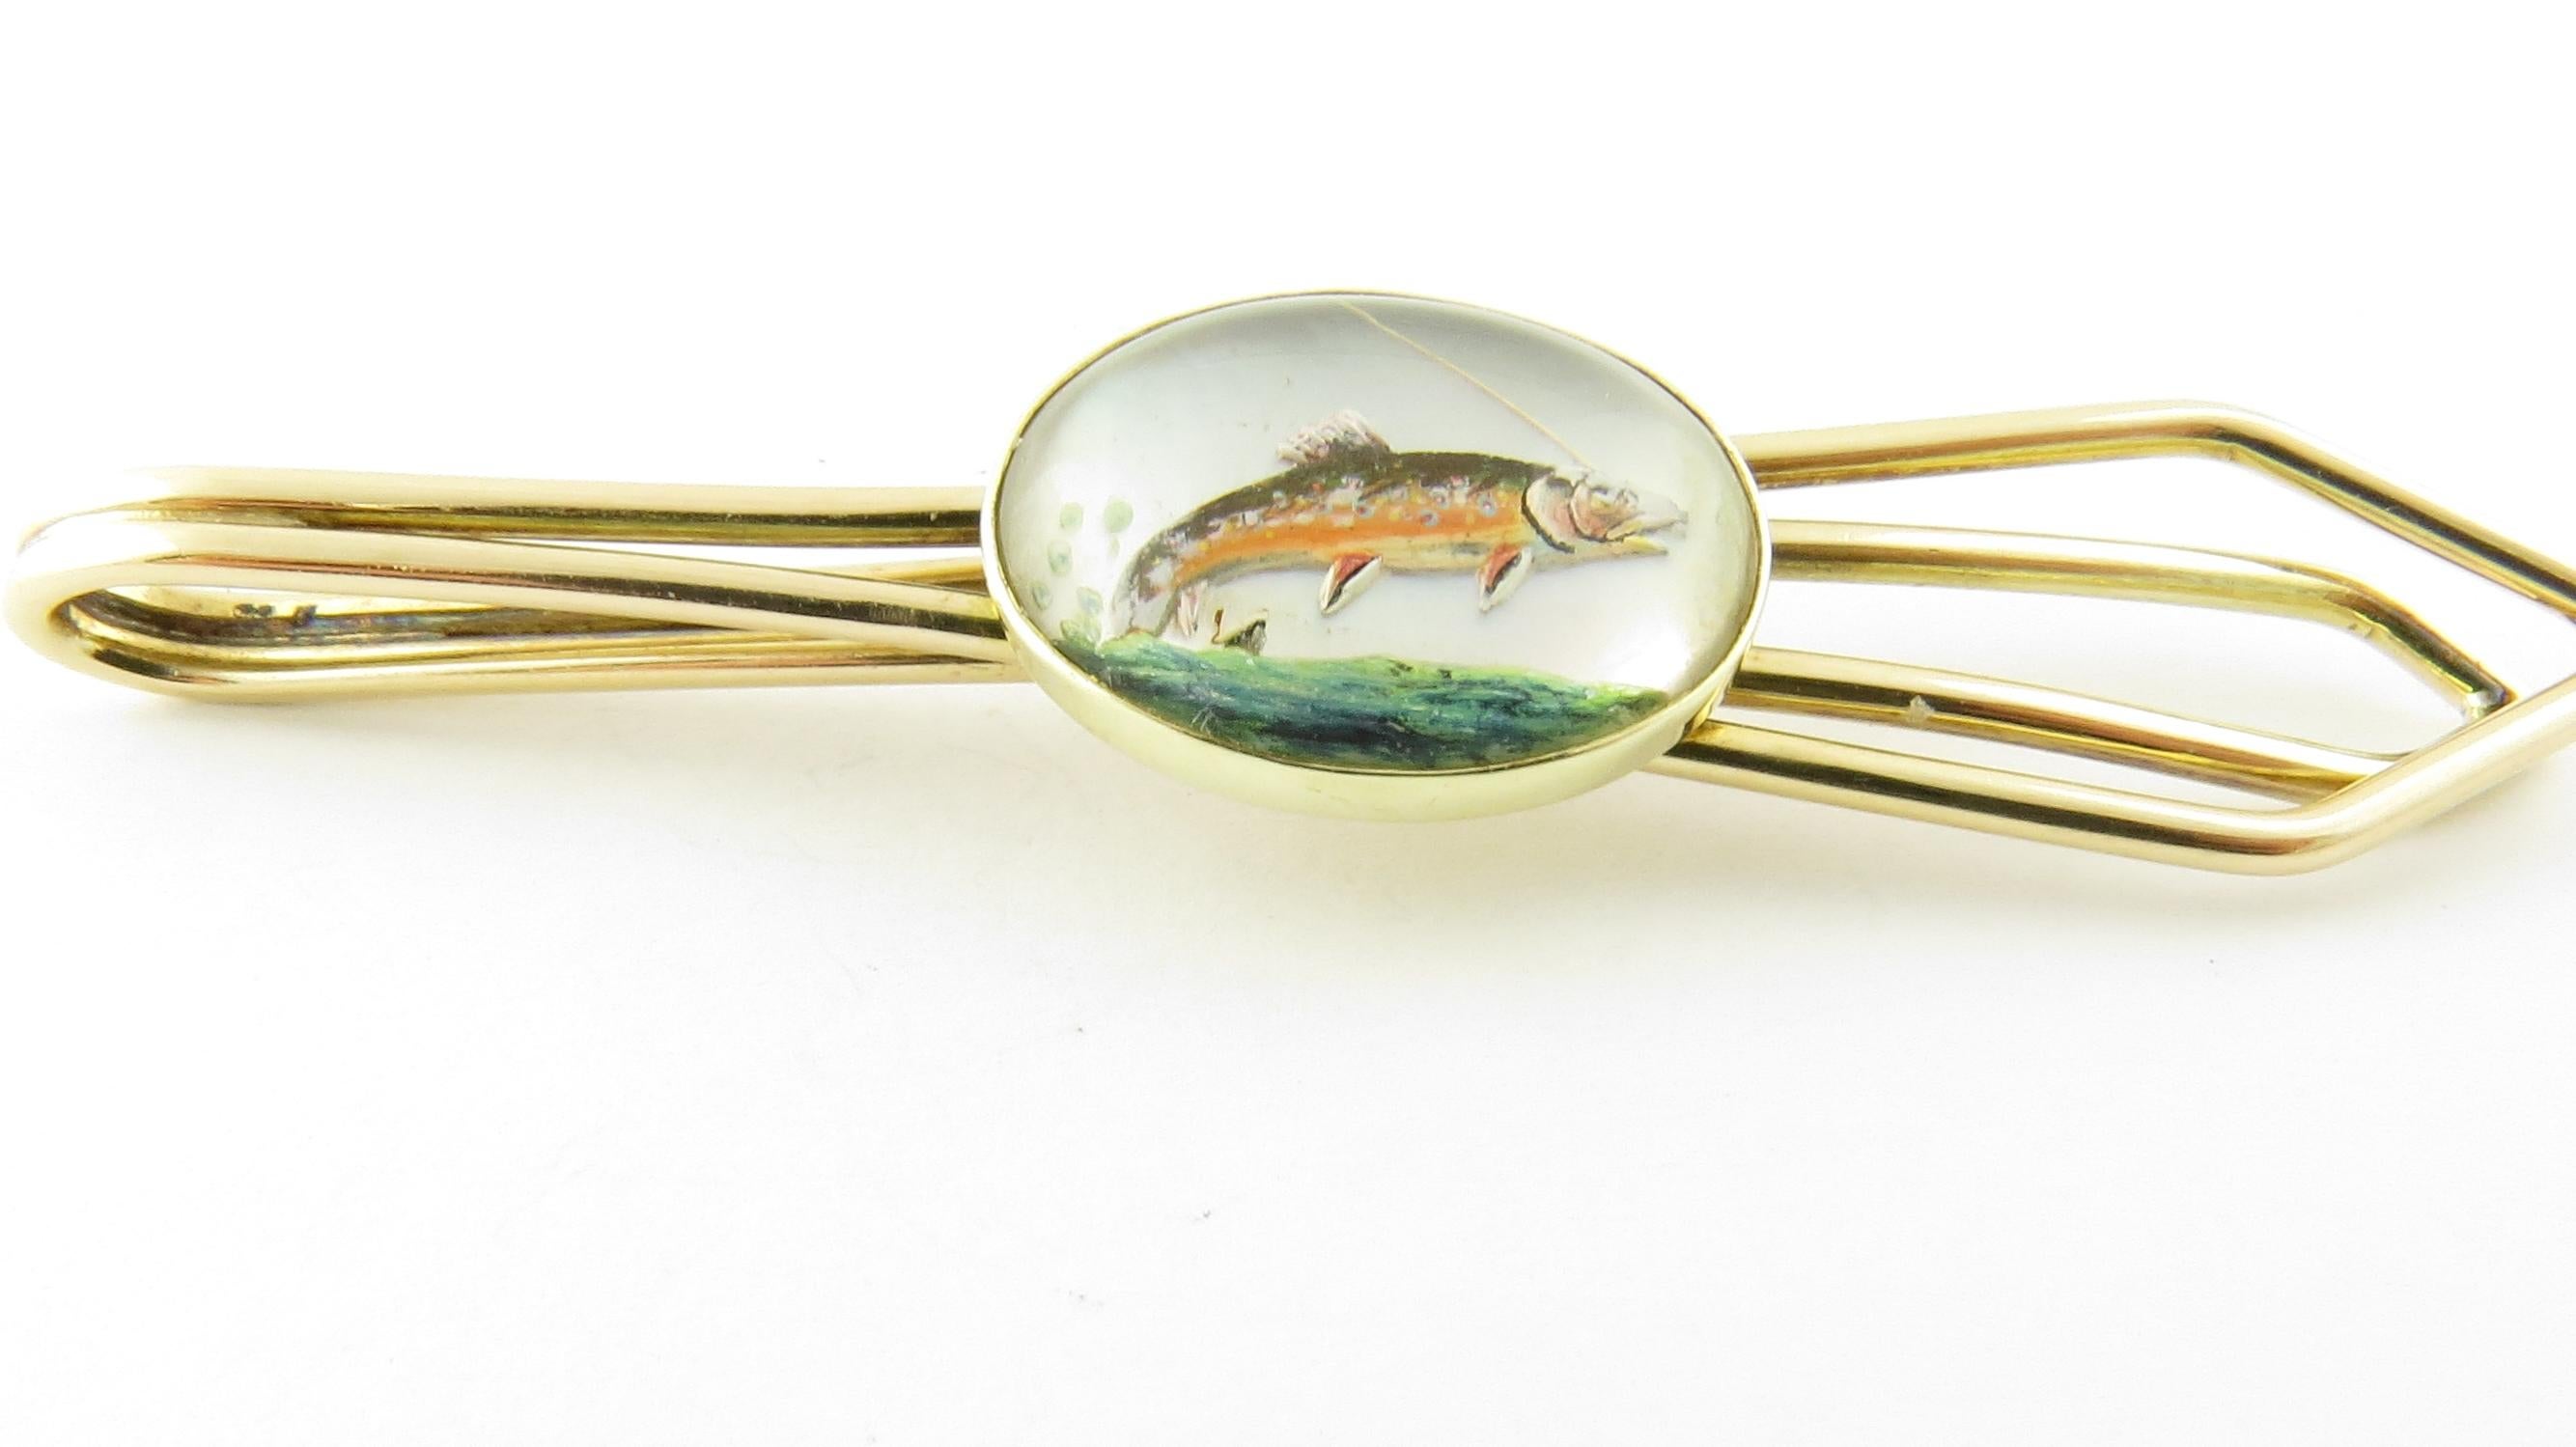 Vintage 14 Karat Yellow Gold Reverse Intaglio Fish Tie Clip

This lovely tie clip features a beautifully detailed reverse intaglio fish (16 mm x 13 mm) set on classic 14K yellow gold.

Size: 59 mm x 12 mm

Weight: 4.4 dwt. / 6.9 gr.

Stamped: